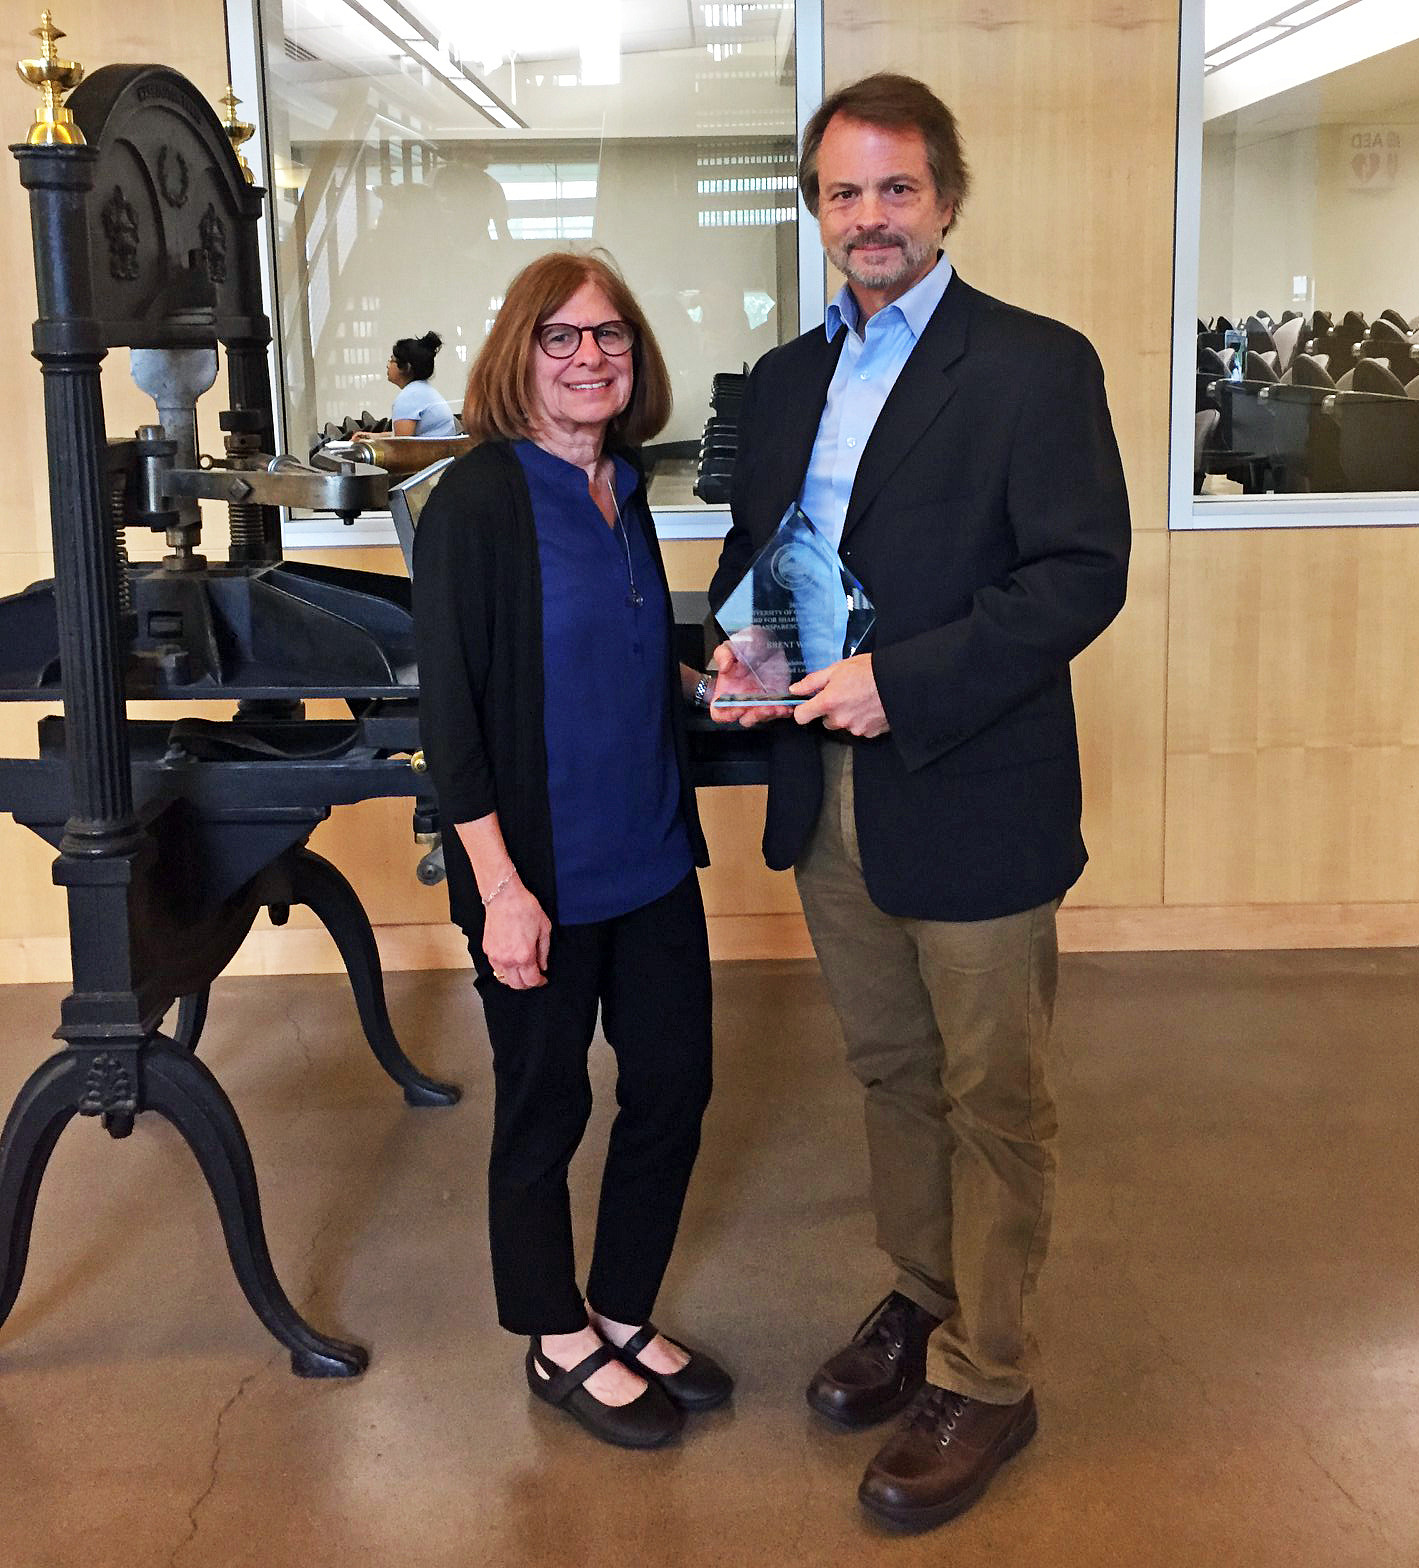 Brent Walth won the 2019 University Senate Shared Governance, Transparency, and Trust Award. He is pictured here with SOJC Senior Associate Dean Leslie Steeves, who nominated him for the award. Photo courtesy of Catalyst Journalism Project, a program co-founded by Brent Walth.